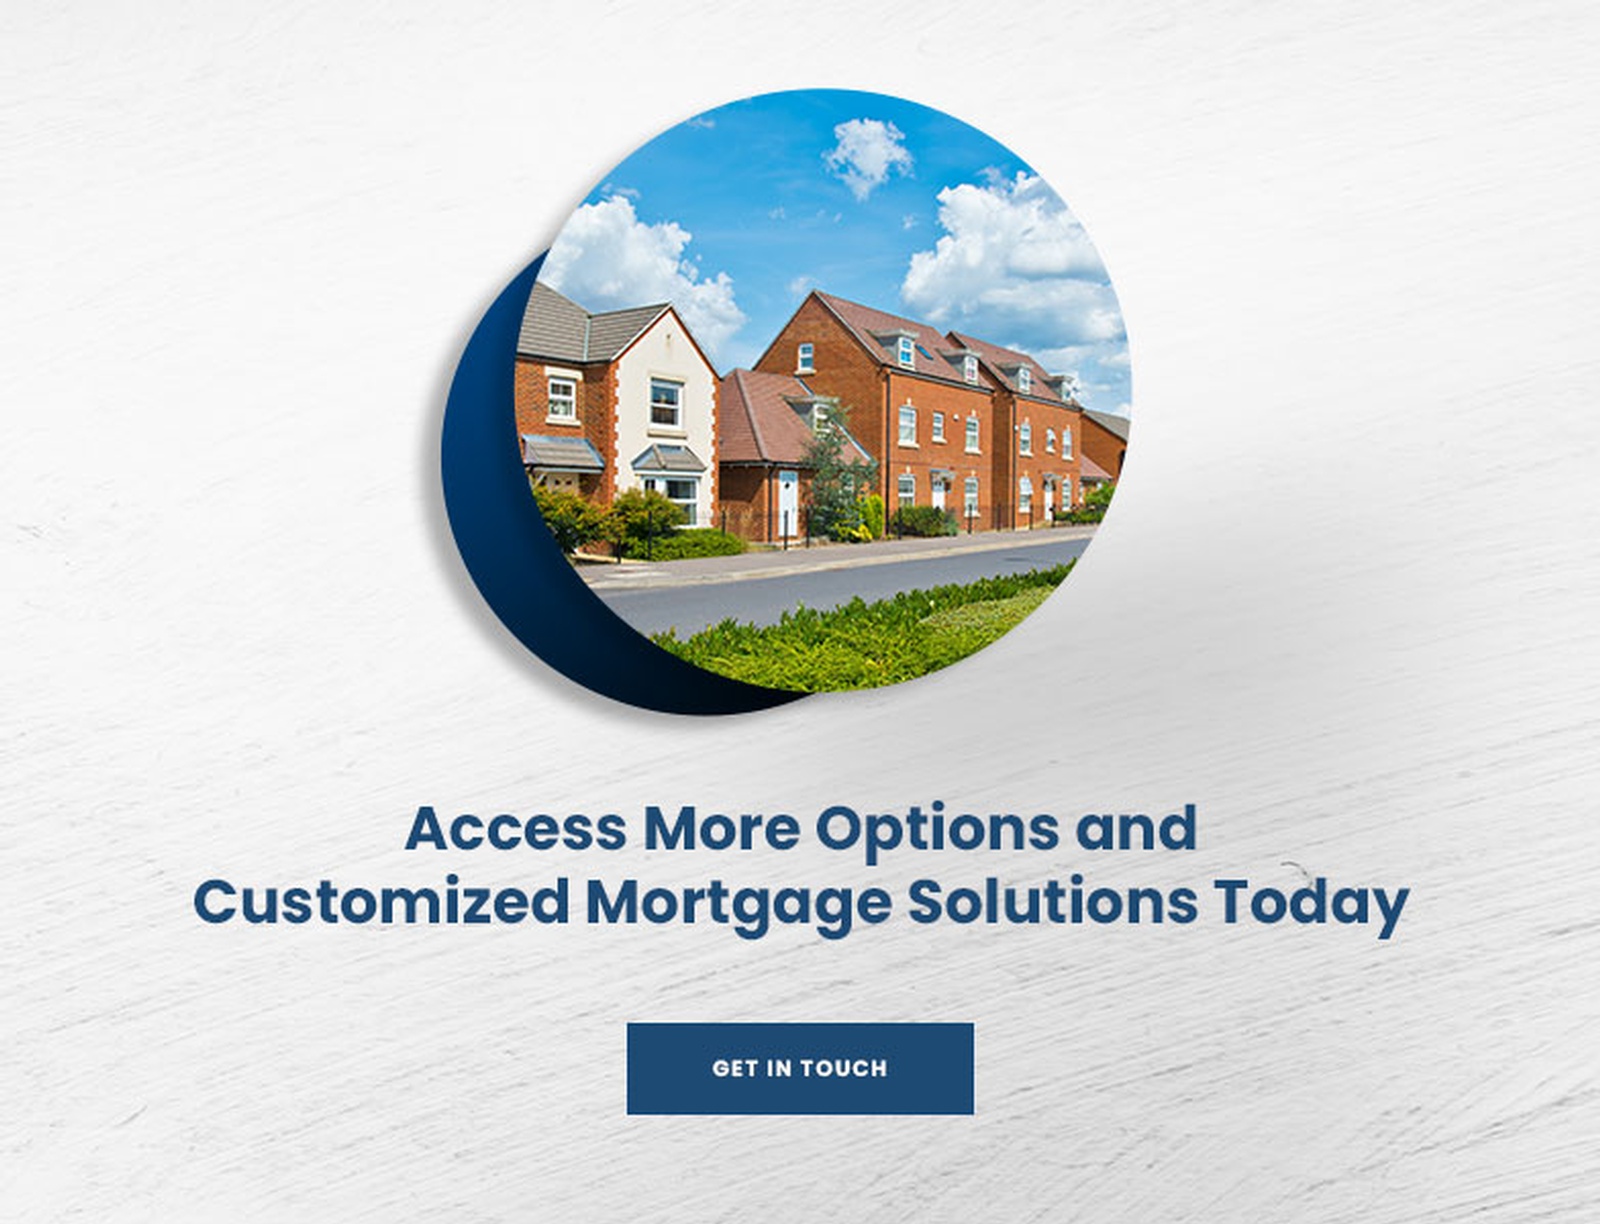 Access More Options and Customized Mortgage Solutions Today